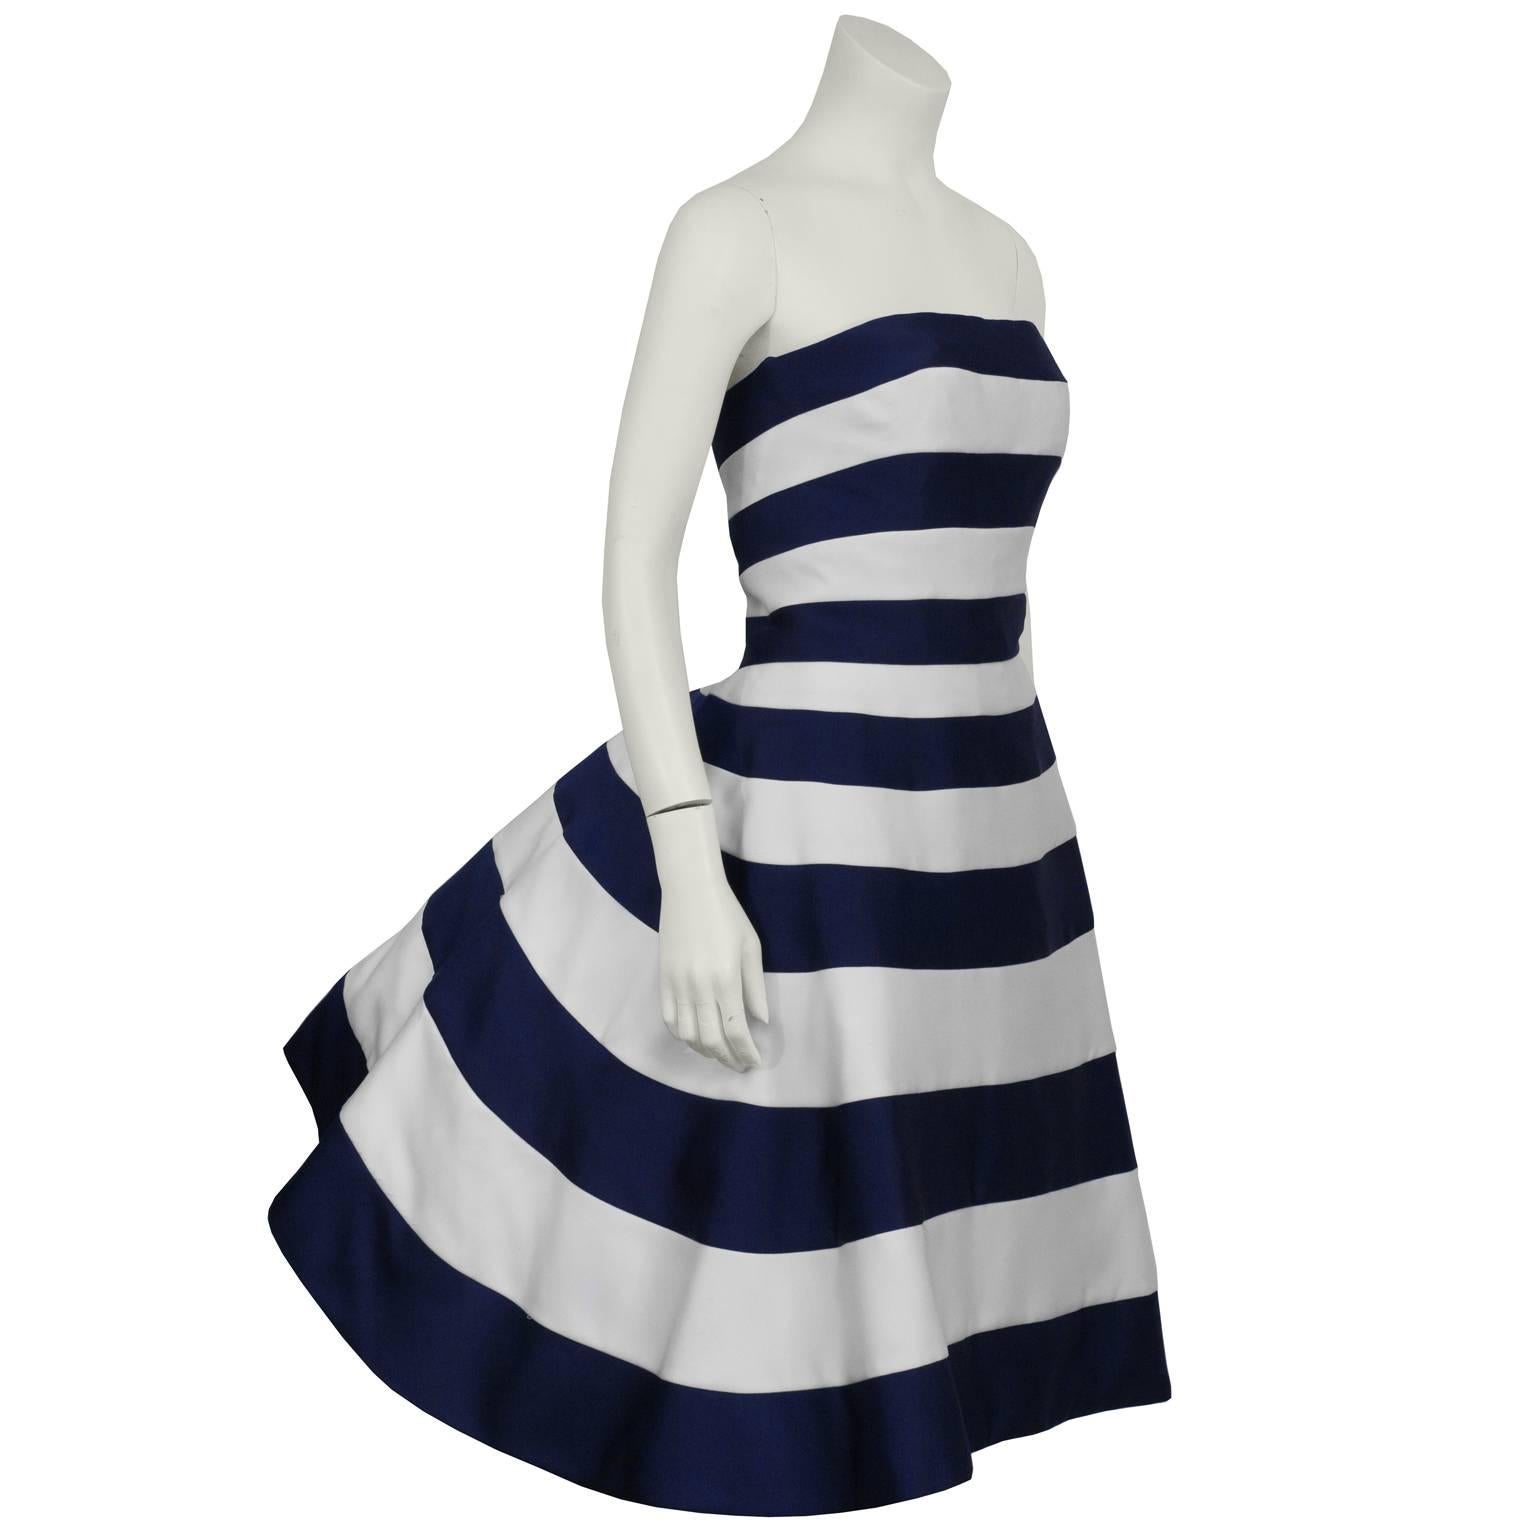 Victor Costa 1980's blue and white striped satin strapless cocktail dress. The dress is a classic Victor Costa style with a fitted front and exaggerated pouf at the back. The underskirt is cream satin, pencil style and finished with a navy banded